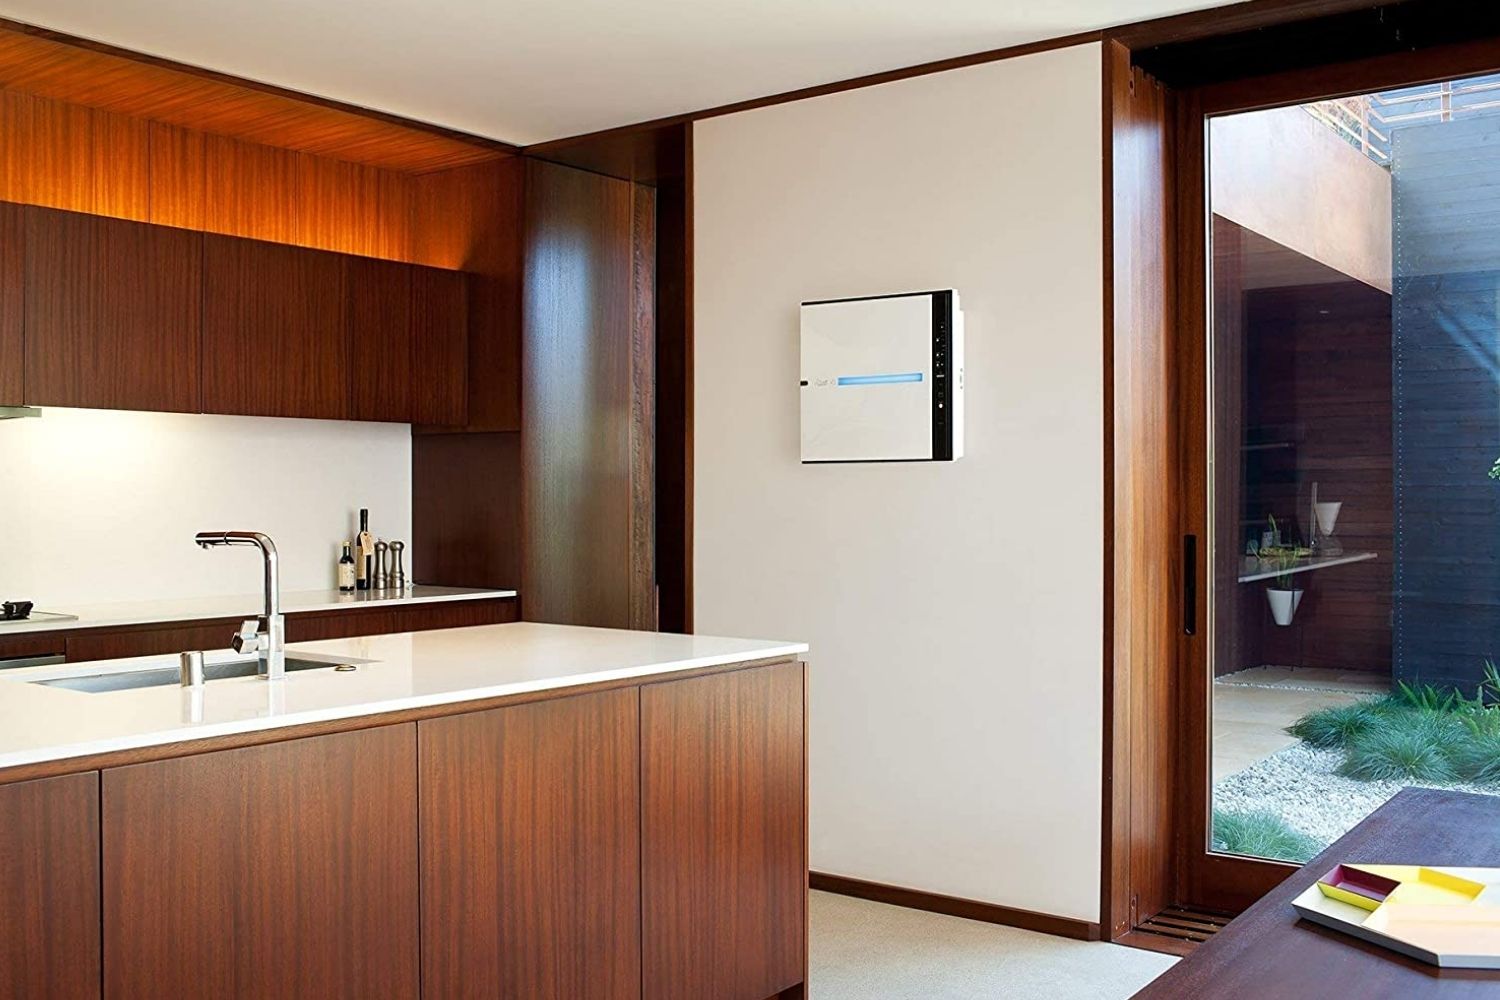 An air purifier for smoke installed in the wall in a sleek and modern kitchen.